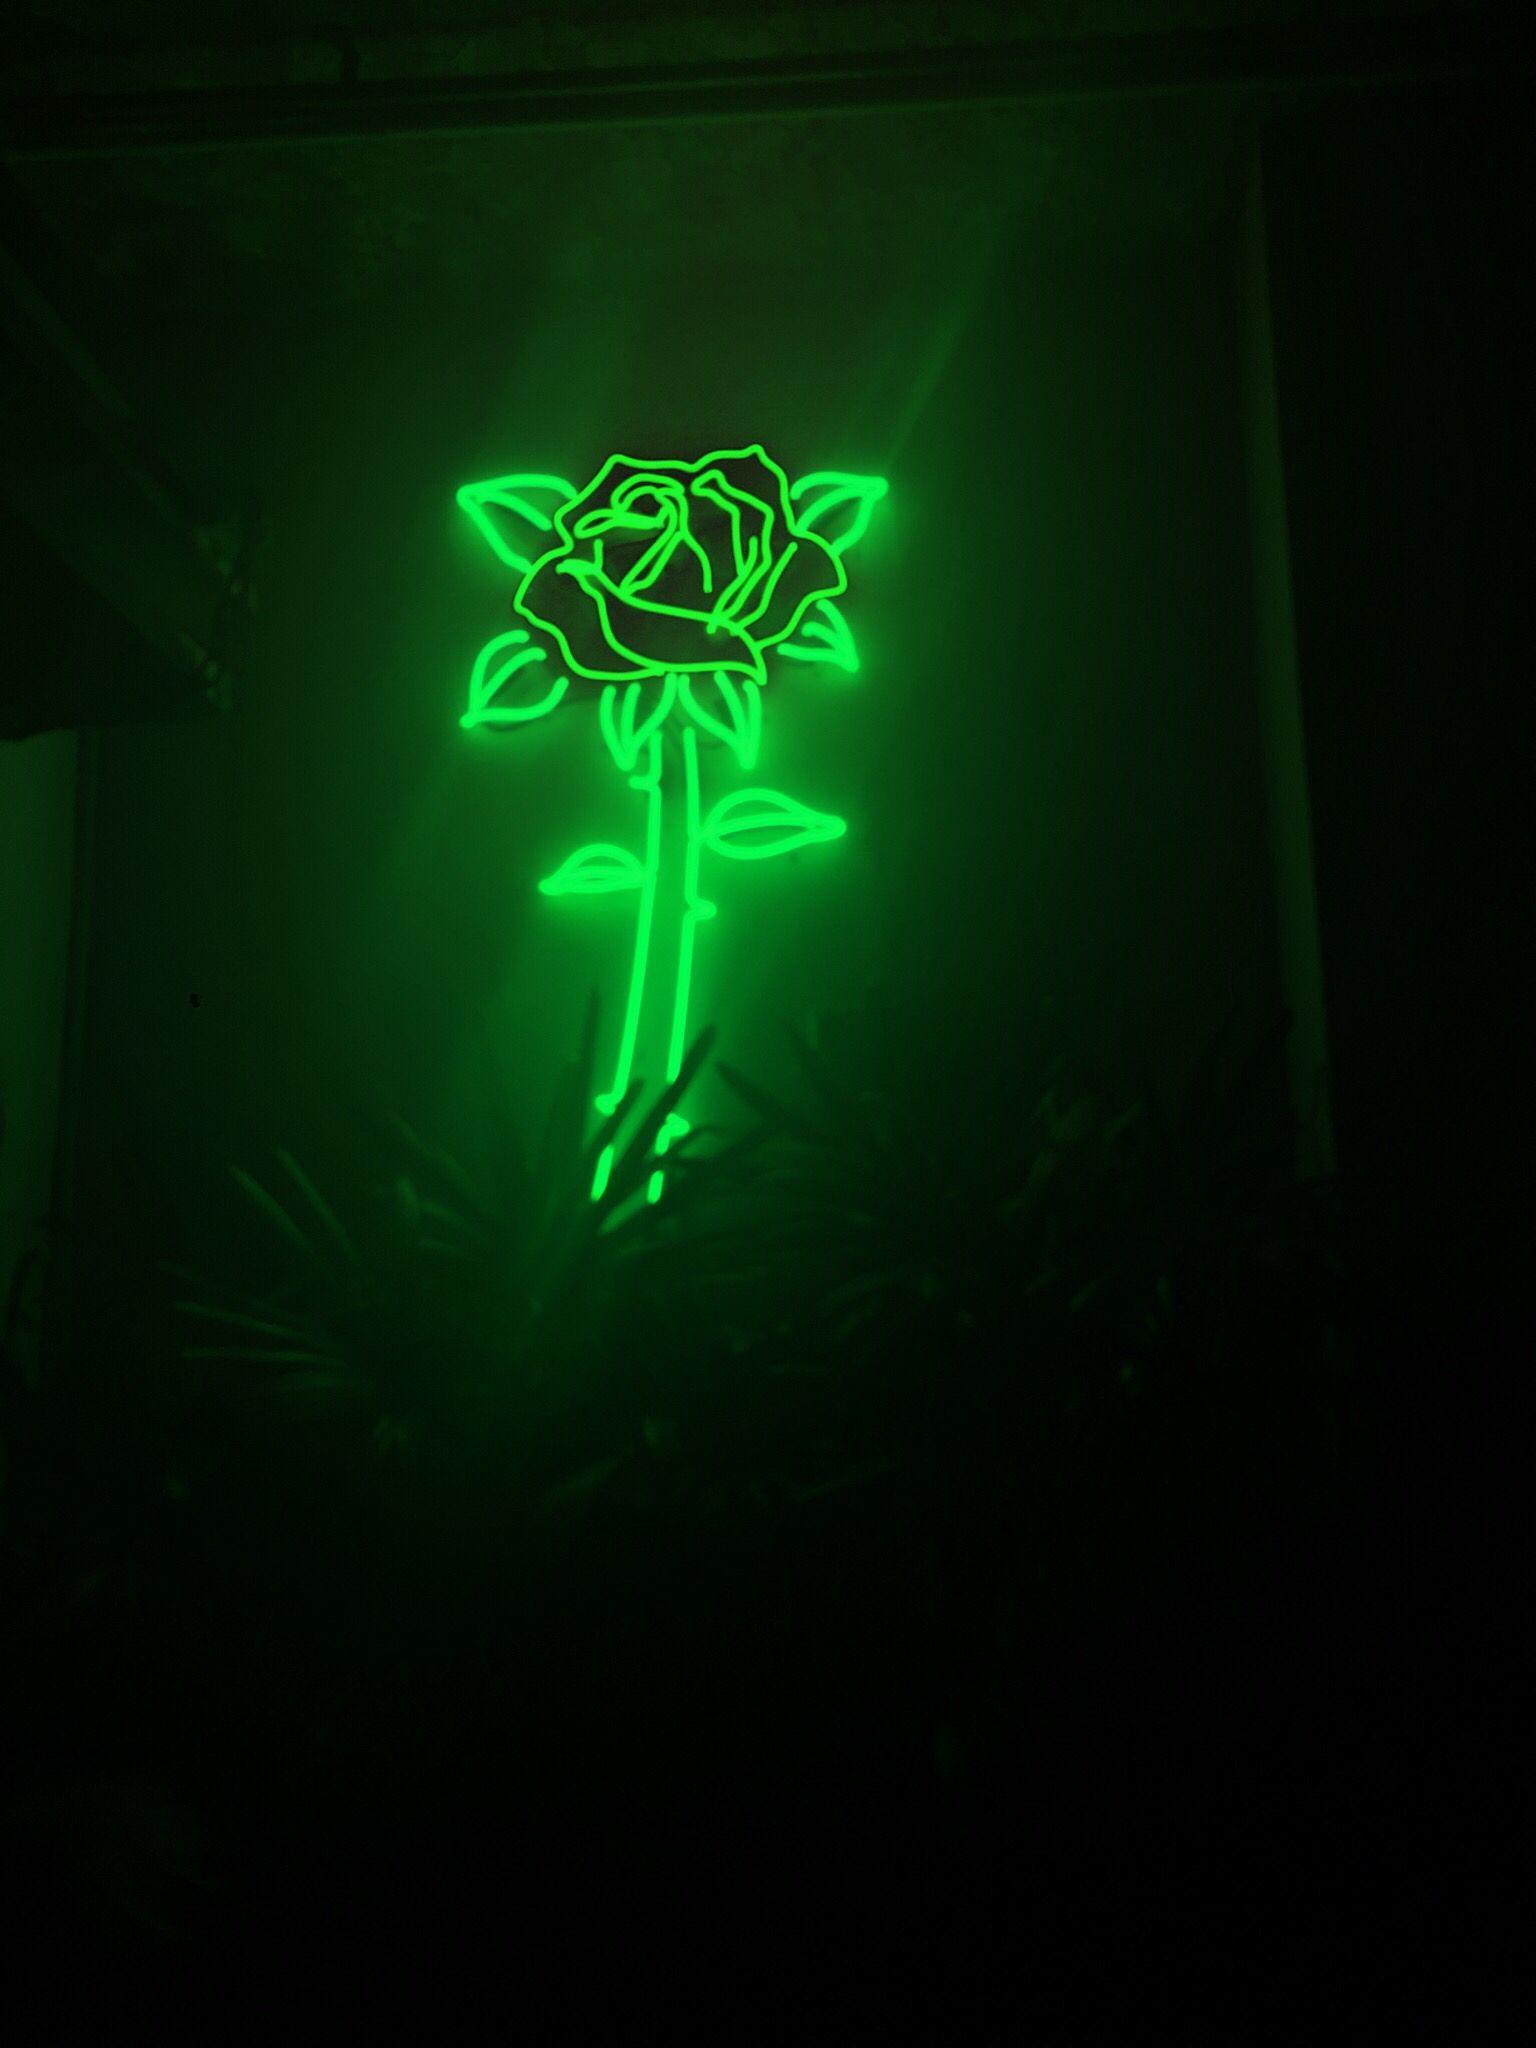 A green neon sign of a rose in a dark room. - Dark green, neon green, lime green